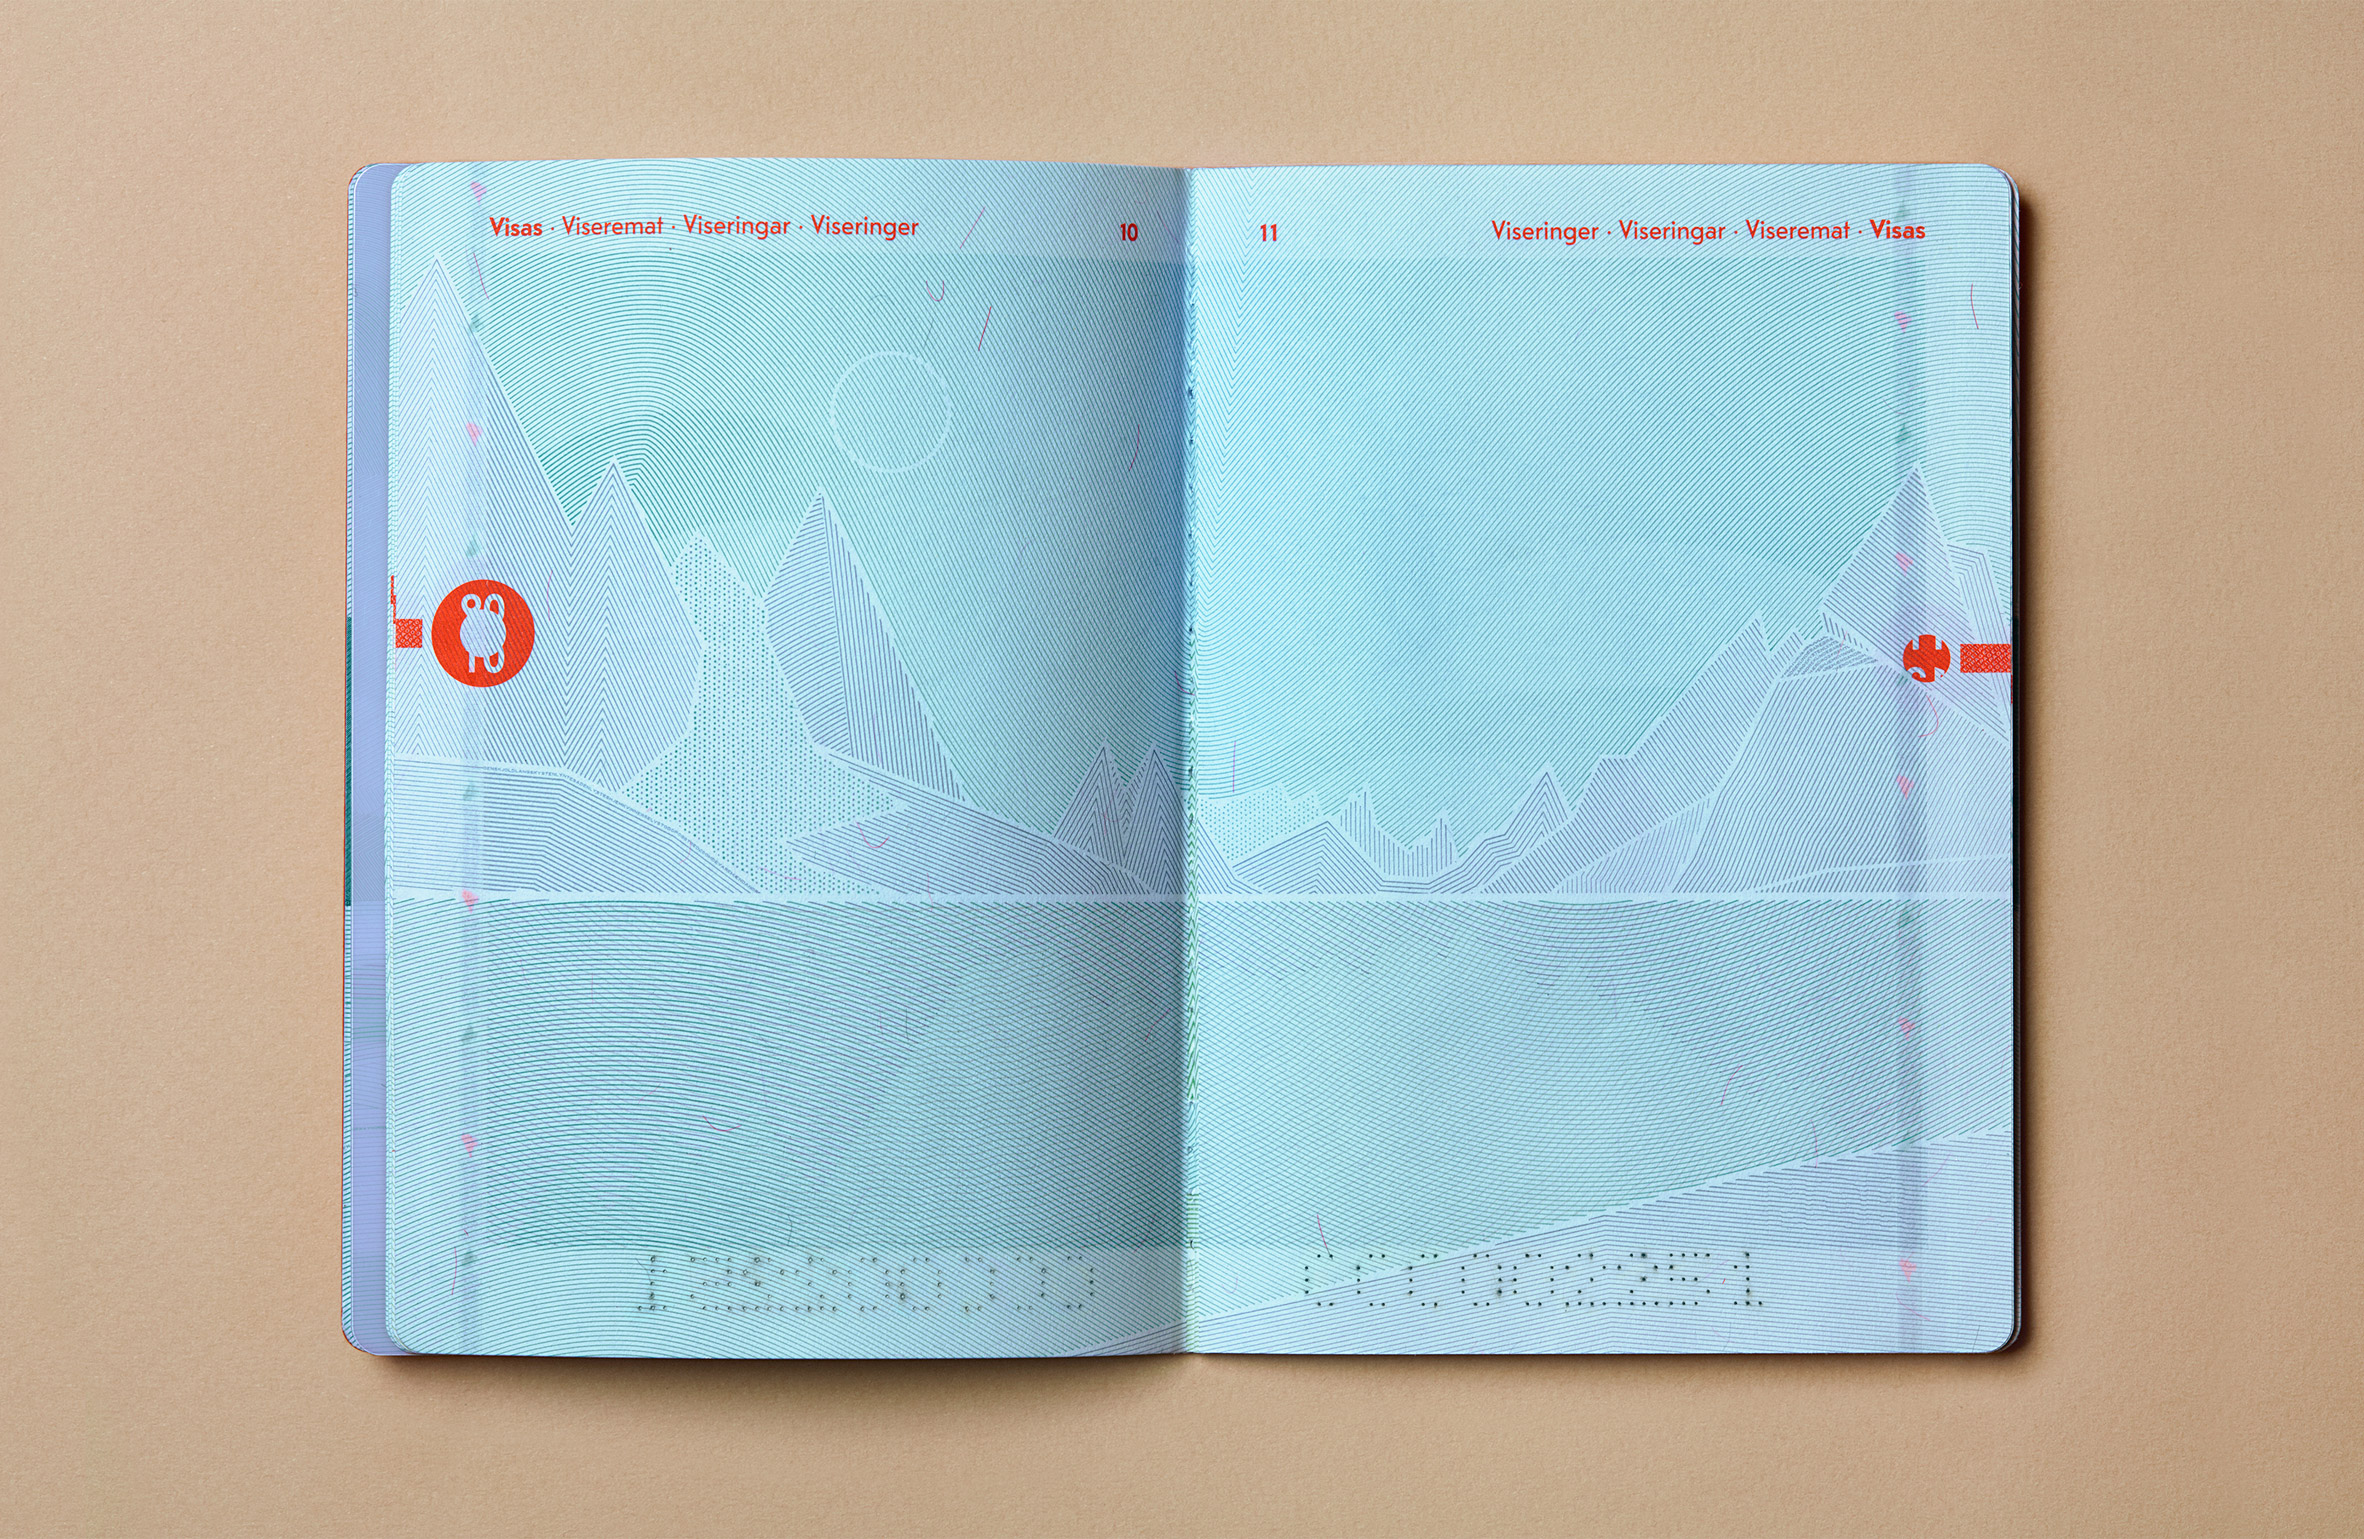 A double-page spread of the passport